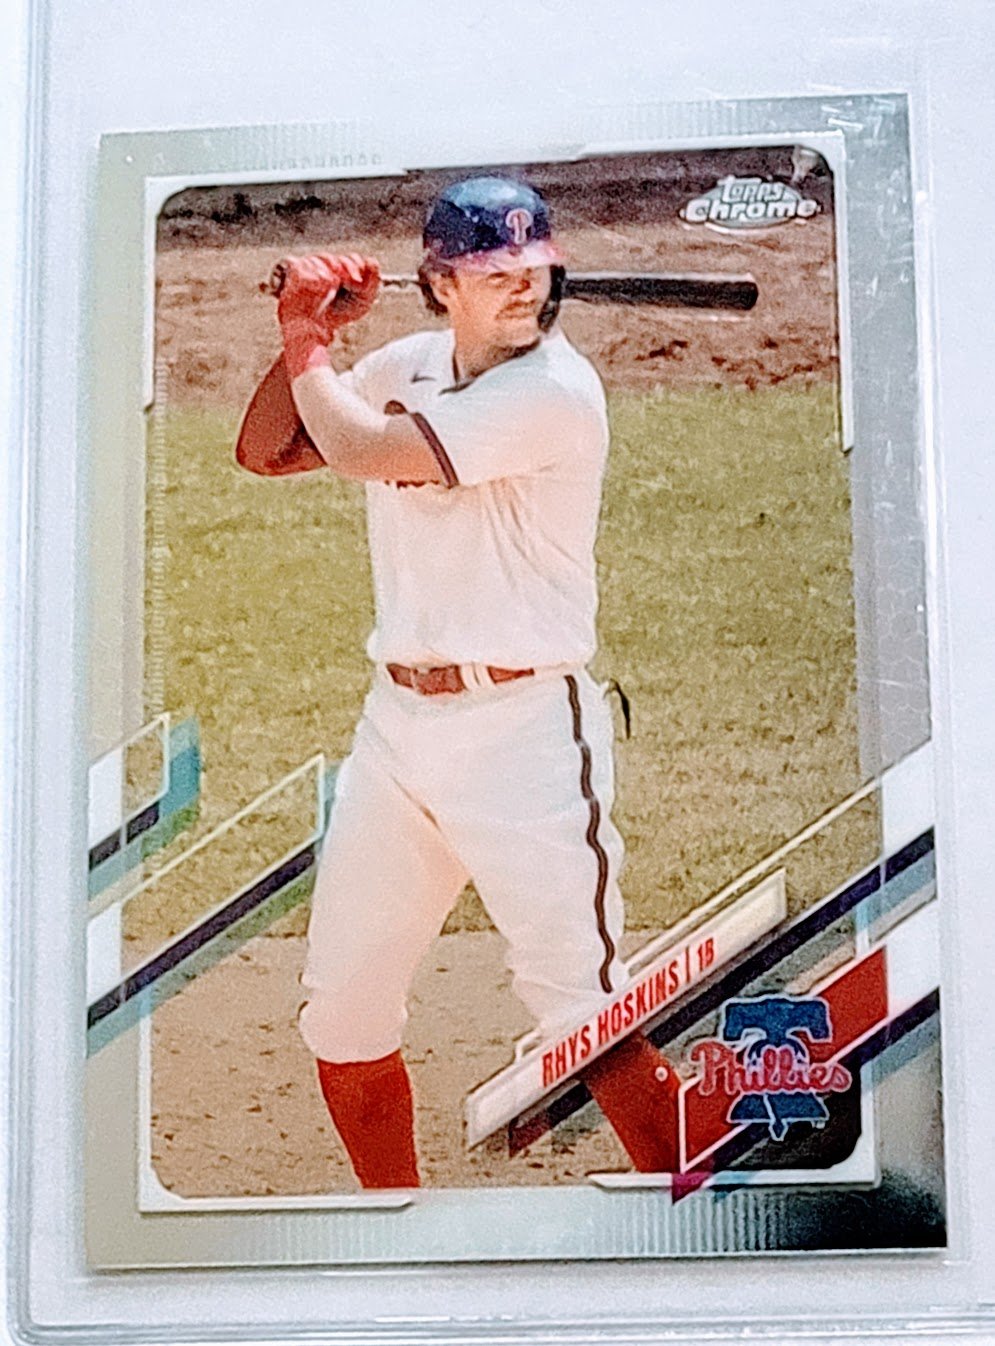 2021 Topps Chrome Rhys Hoskins Baseball Card TPTV simple Xclusive Collectibles   